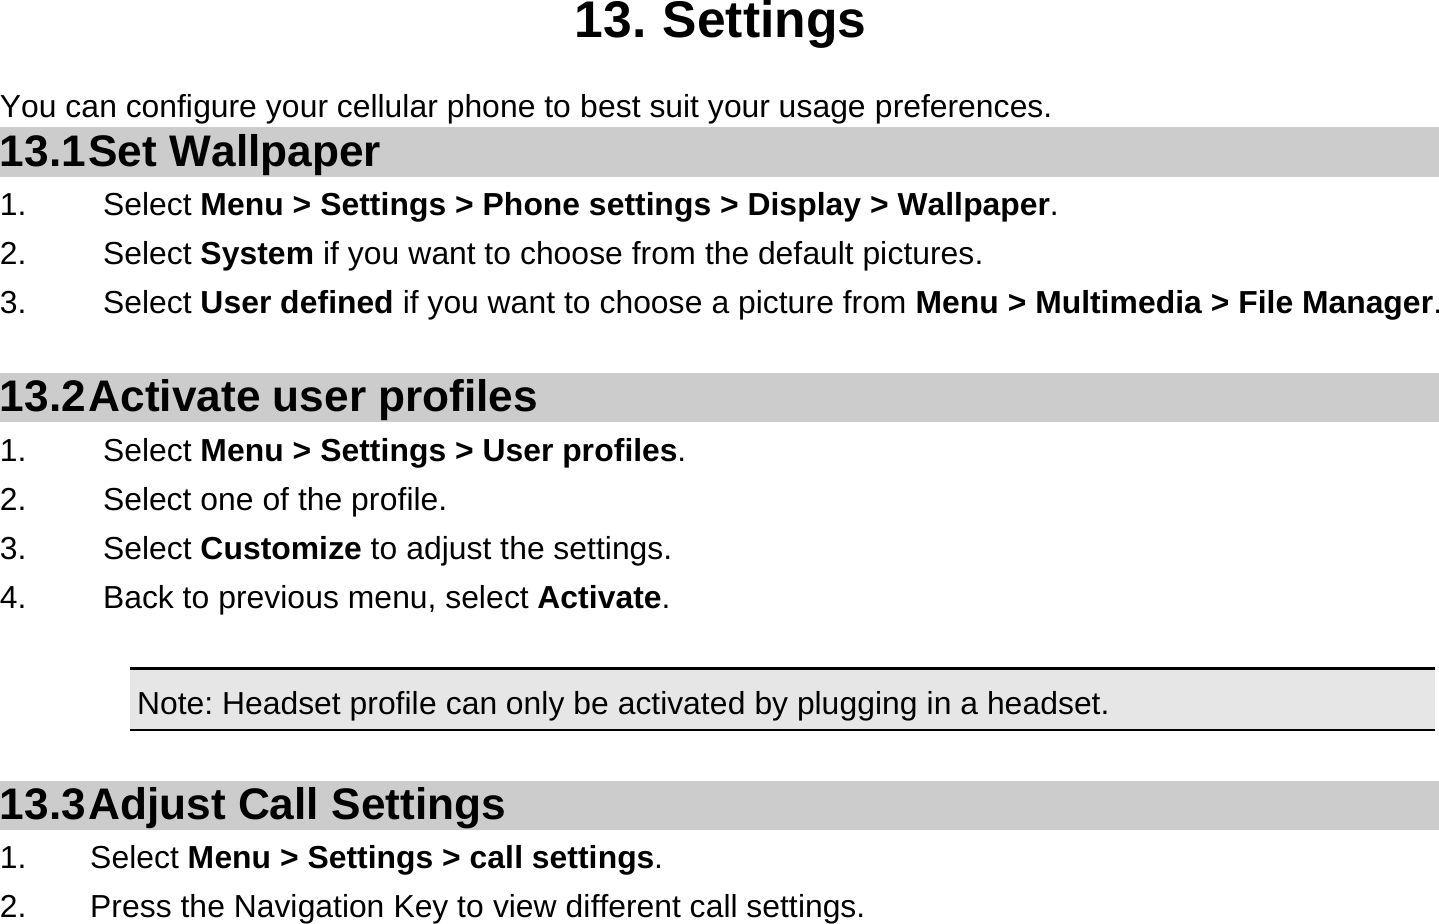  13. Settings You can configure your cellular phone to best suit your usage preferences. 13.1 Set  Wallpaper 1.   Select Menu &gt; Settings &gt; Phone settings &gt; Display &gt; Wallpaper. 2.   Select System if you want to choose from the default pictures. 3.   Select User defined if you want to choose a picture from Menu &gt; Multimedia &gt; File Manager.  13.2 Activate  user  profiles 1.   Select Menu &gt; Settings &gt; User profiles. 2.    Select one of the profile. 3.   Select Customize to adjust the settings. 4.    Back to previous menu, select Activate.  Note: Headset profile can only be activated by plugging in a headset.   13.3 Adjust Call Settings 1.    Select Menu &gt; Settings &gt; call settings. 2.        Press the Navigation Key to view different call settings. 